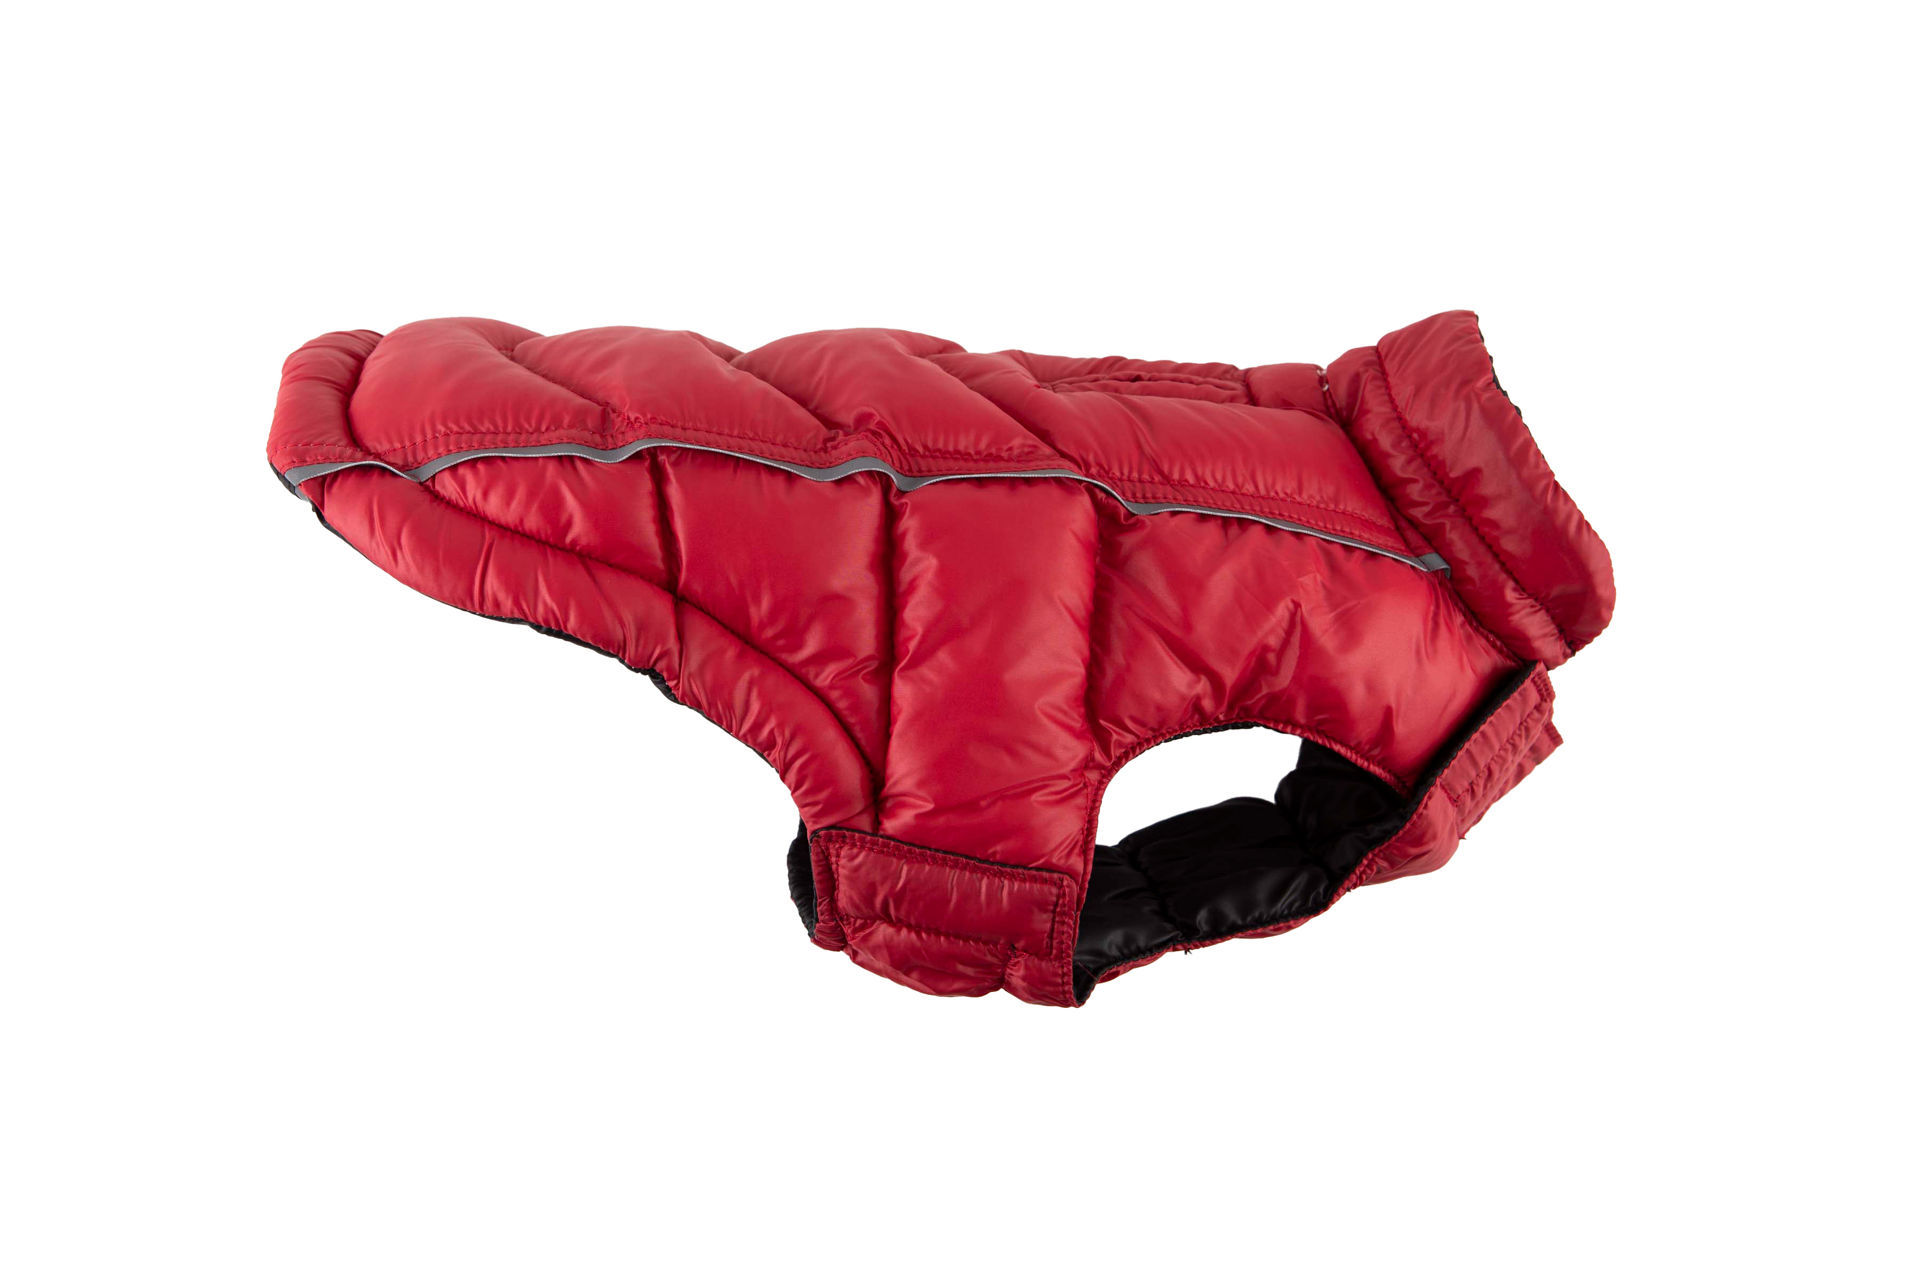 Picture of Featherlite Reversible-Reflective Puffer Vest Black/Red